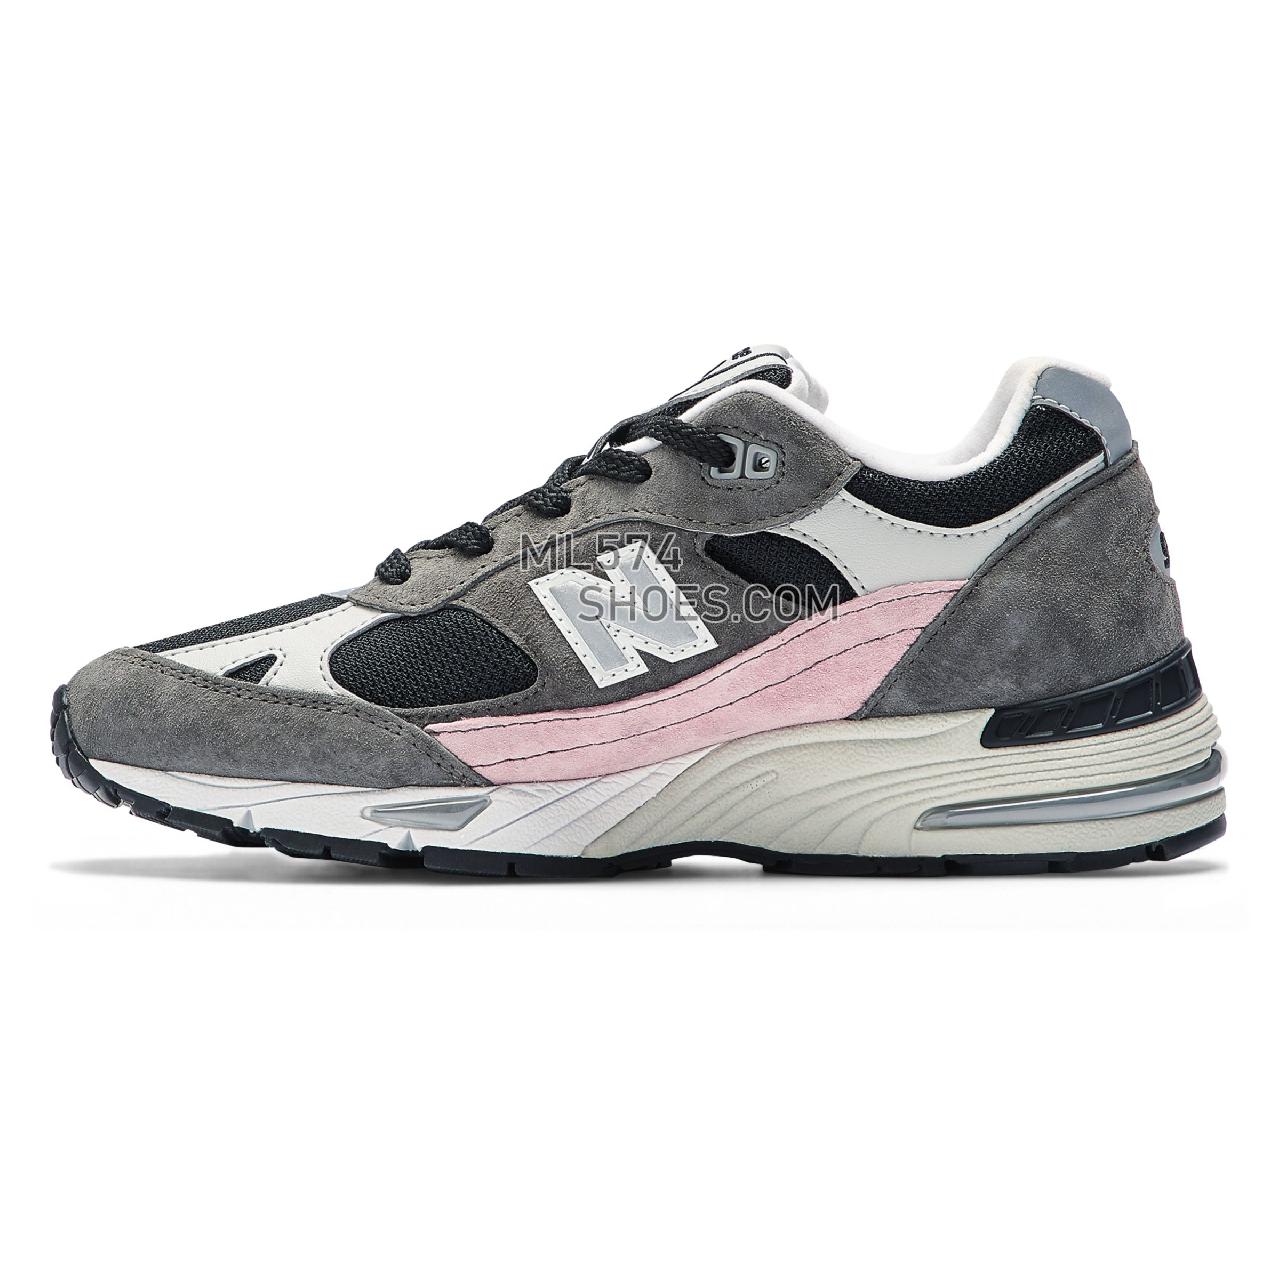 New Balance Made in UK 991 - Women's Made in USA And UK Sneakers - Black with Grey and Beige - W991KWG